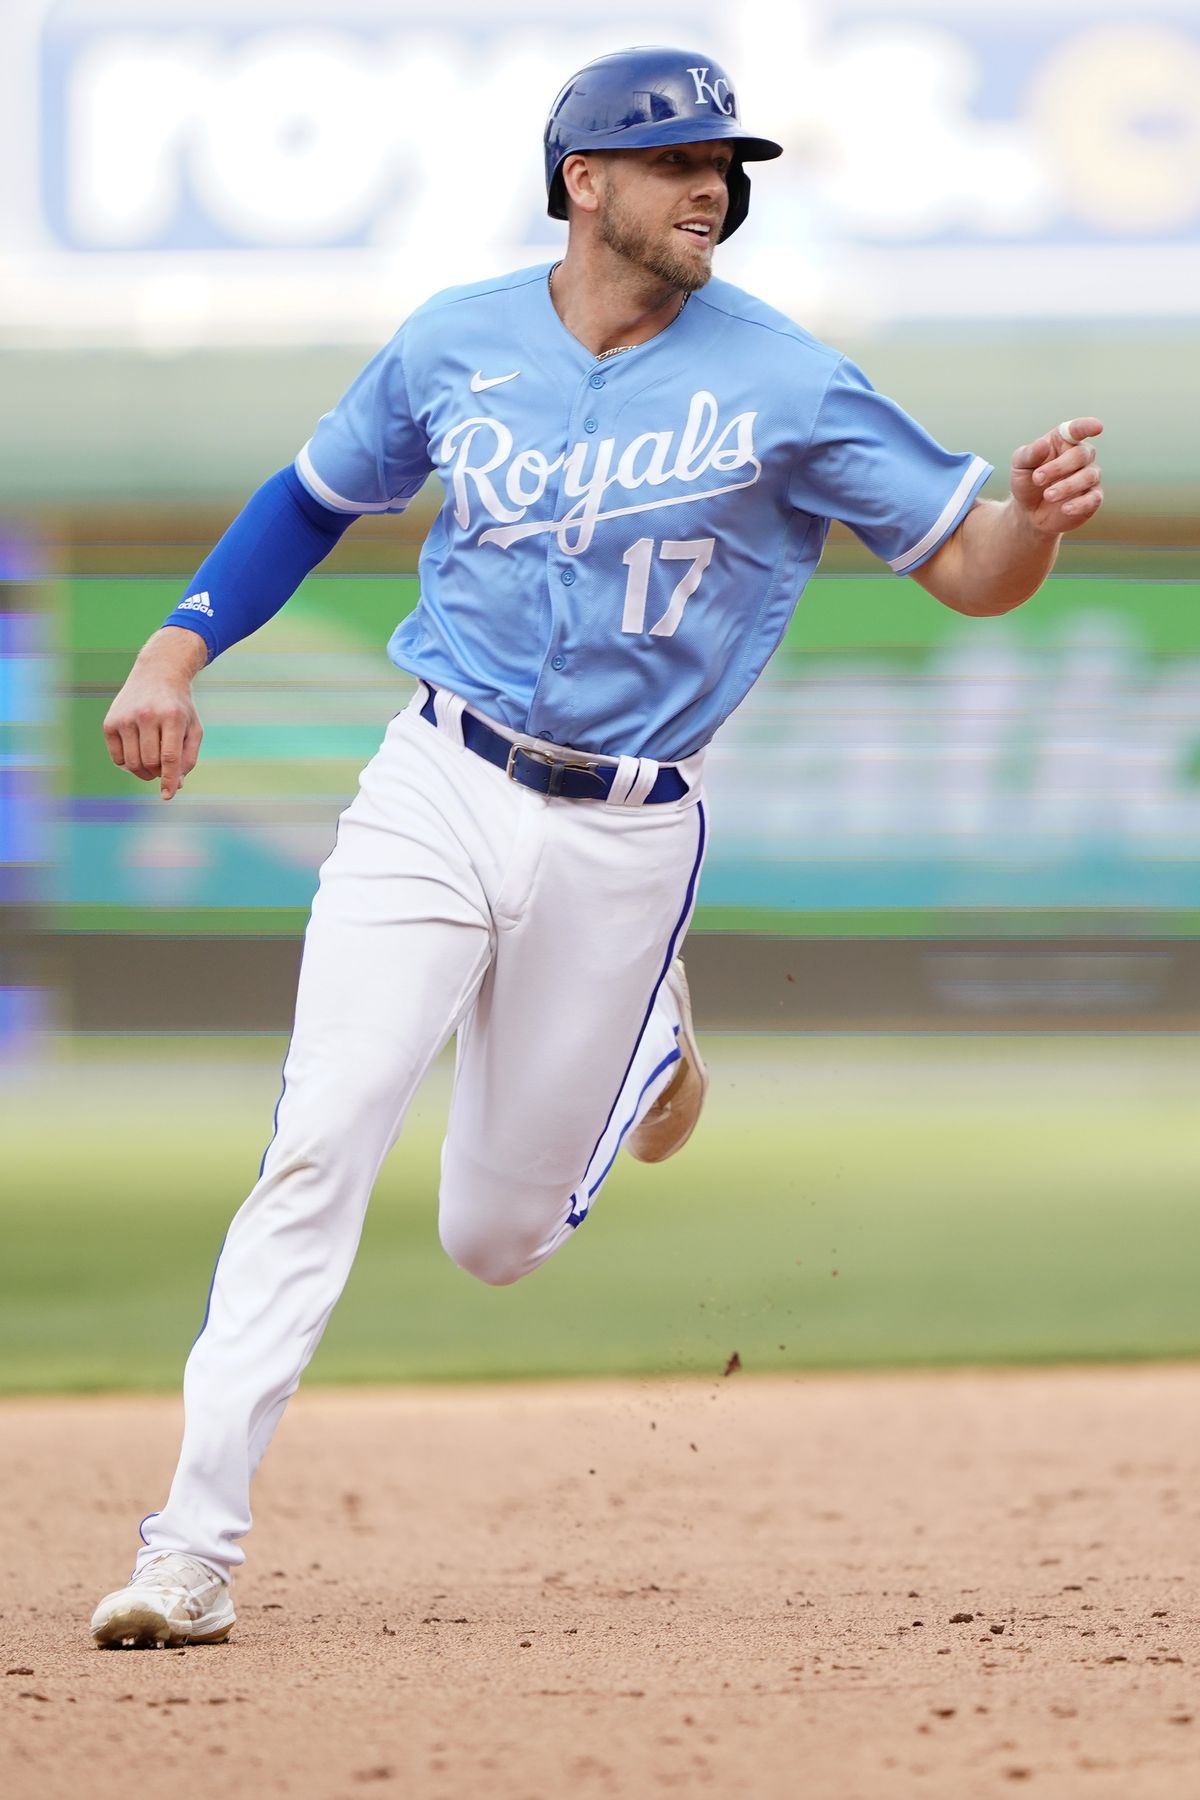 Hunter Dozier #17 of the Kansas City Royals celebrates after defeating the Cleveland Guardians in 10 innings at Kauffman Stadium on April 9, 2022 in Kansas City, Missouri.